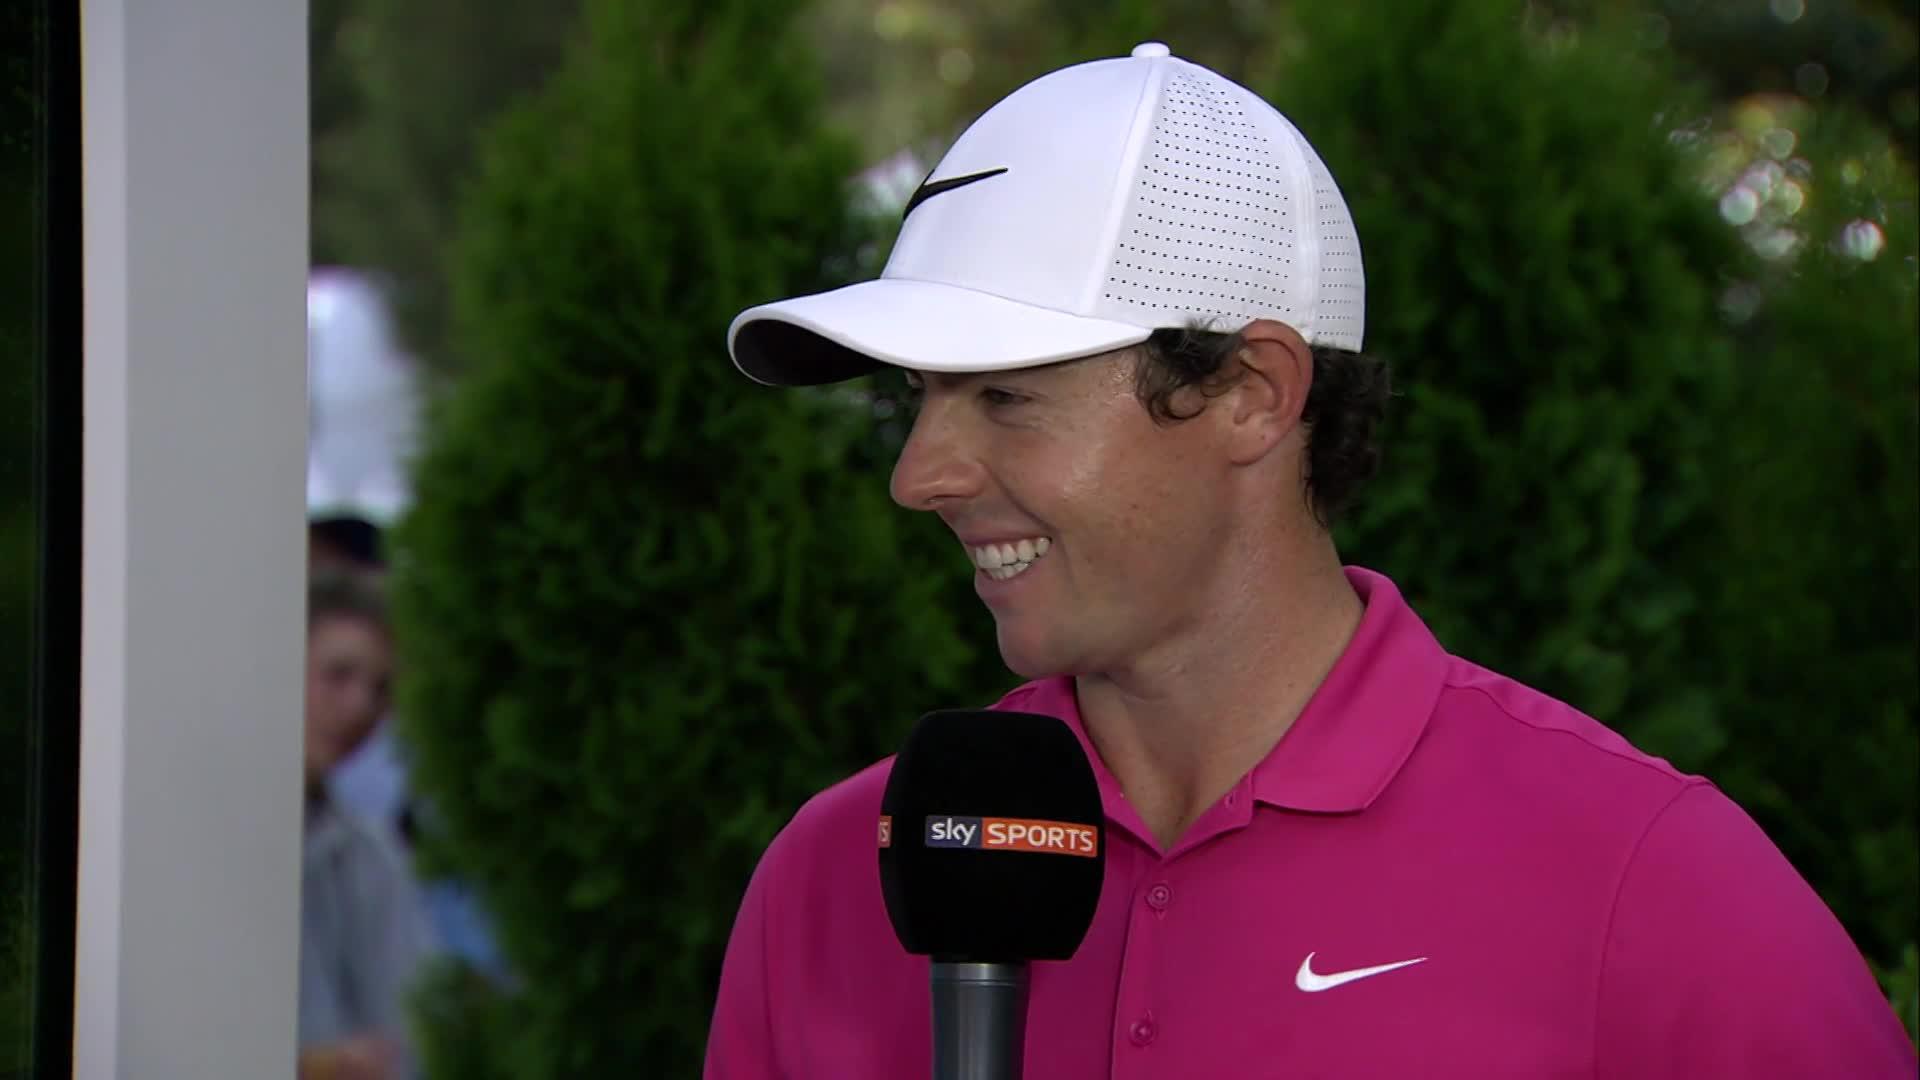 Rory McIlroy Encouraged By Final Round 66 At Wells Fargo